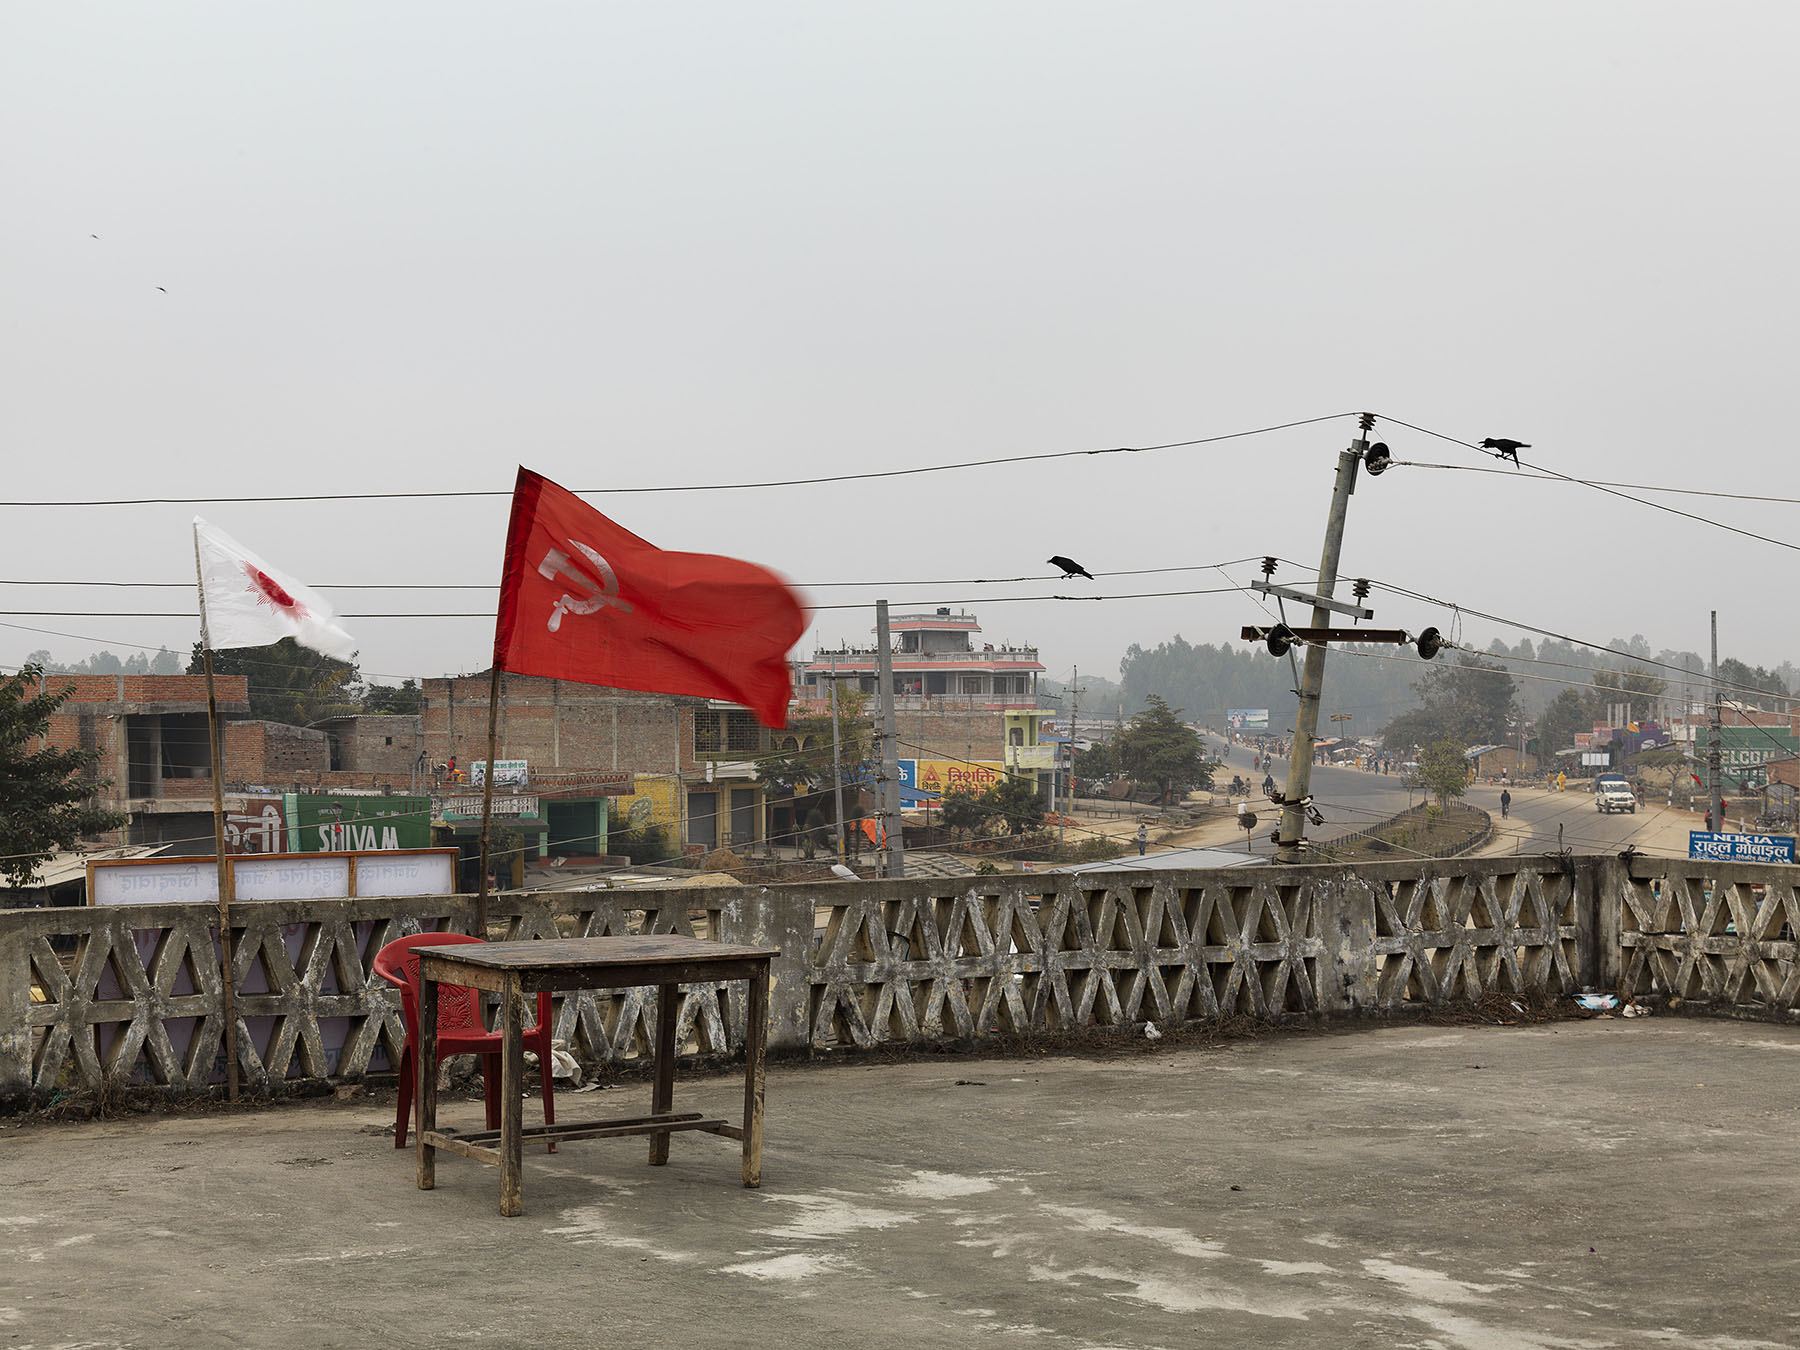 Nepal, communism. Communist Party of Nepal (Unified Marxist Leninist), aka CPN (UML): district office in Danusha, Janakpur zone.
CPN (UML) came second (after Nepali Congress) in the 2013 Constituent Assembly elections, with 175 out of 575 elected seats.